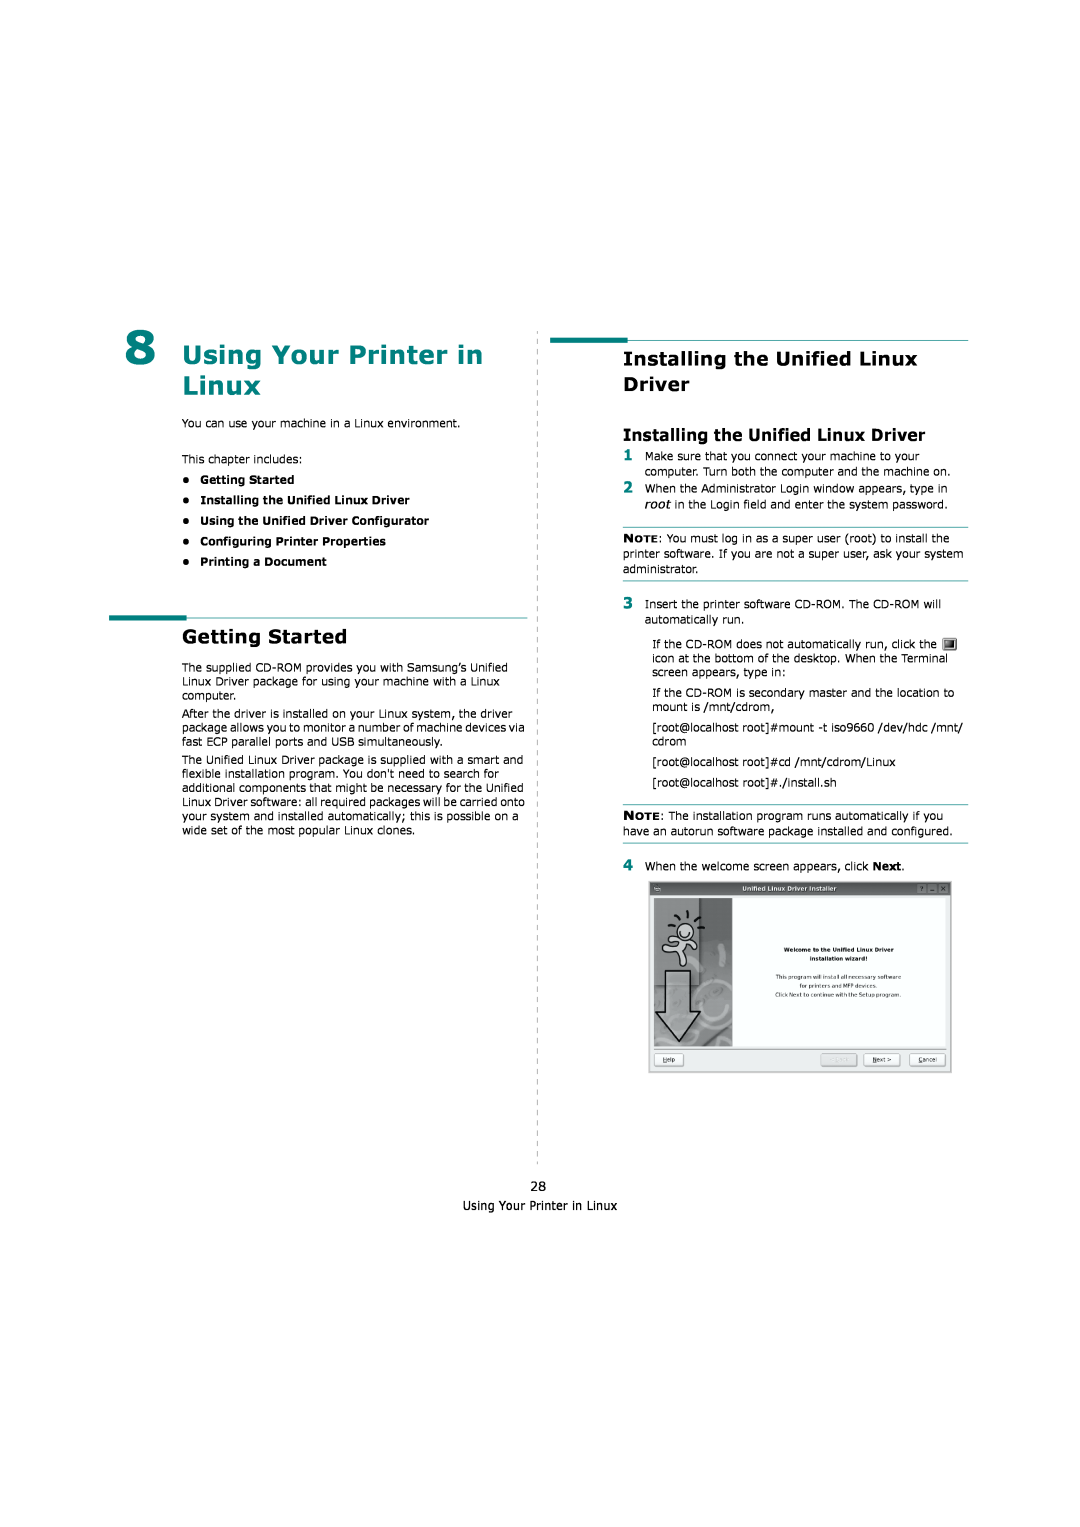 Samsung ML-4550 Using Your Printer in Linux, Getting Started, Installing the Unified Linux Driver, Printing a Document 